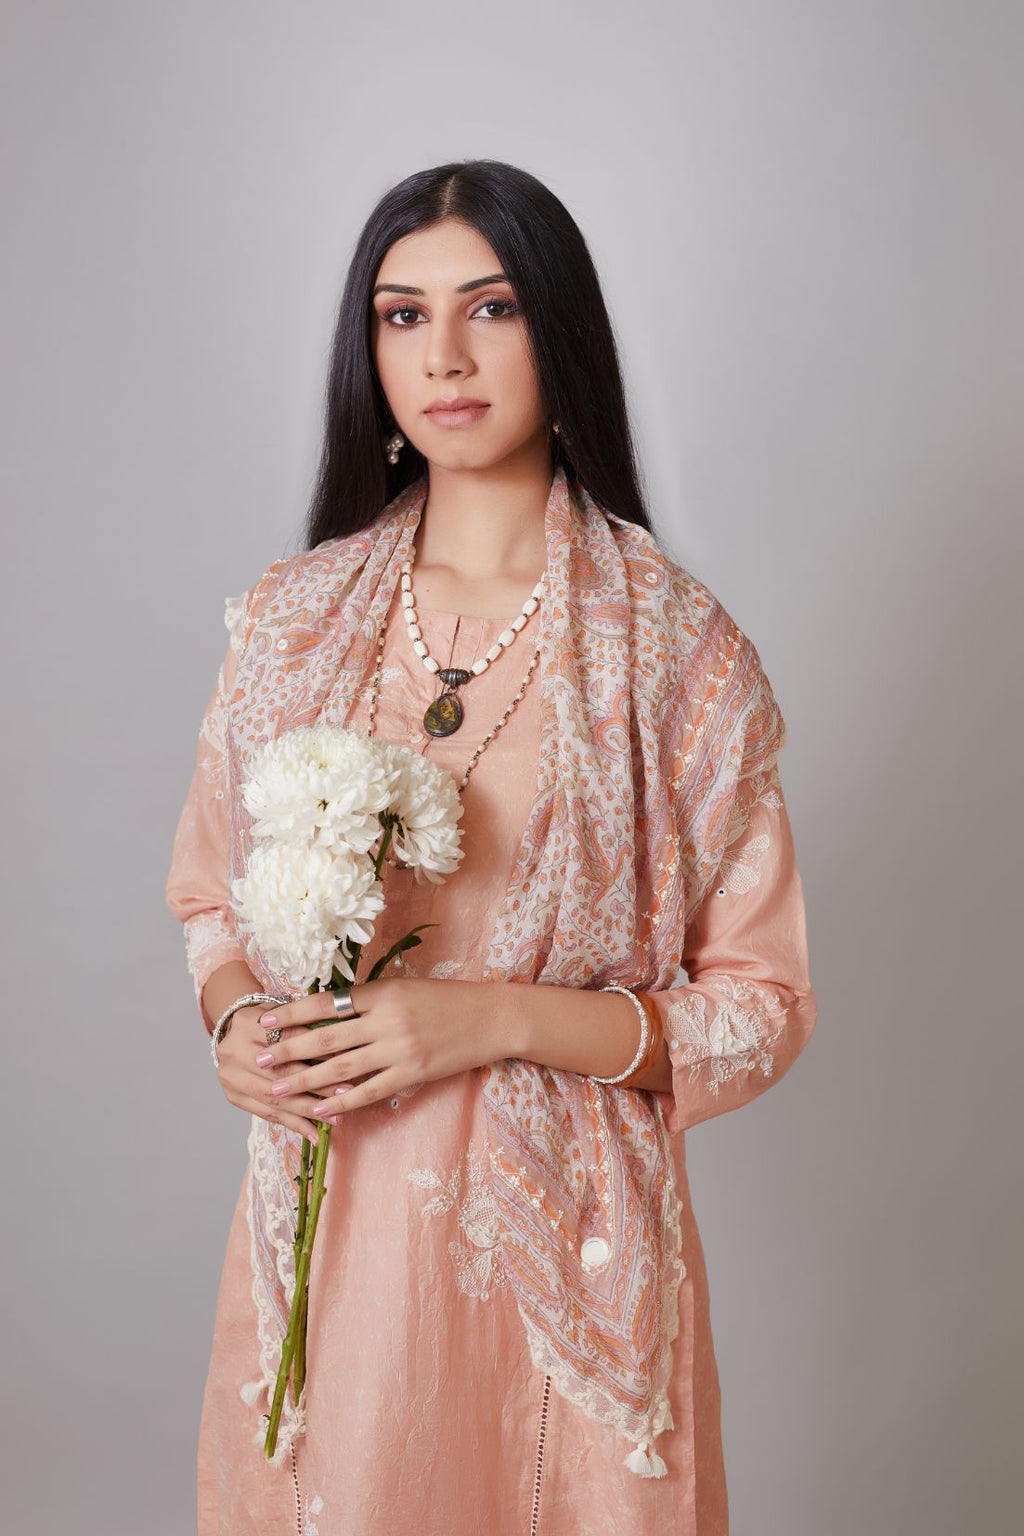 Hand crushed silk kurta set with raised flower embroidery, highlighted with mirror hand work and beads.